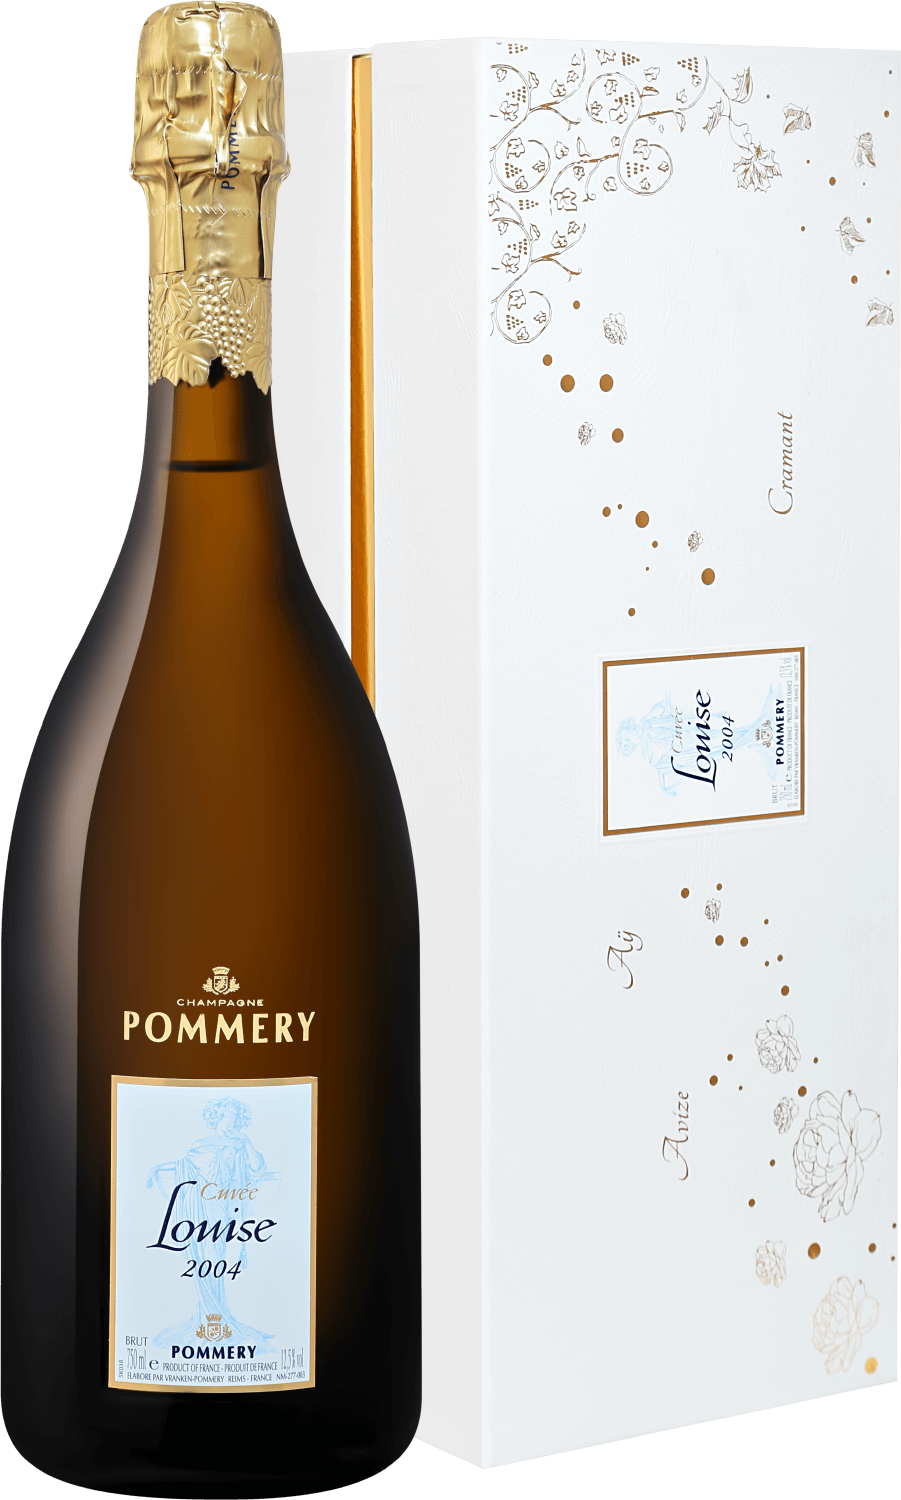 Pommery Cuvée Louise Brut Millesime Champagne AOC (gift box) taittinger millesime brut champagne aoc gift box